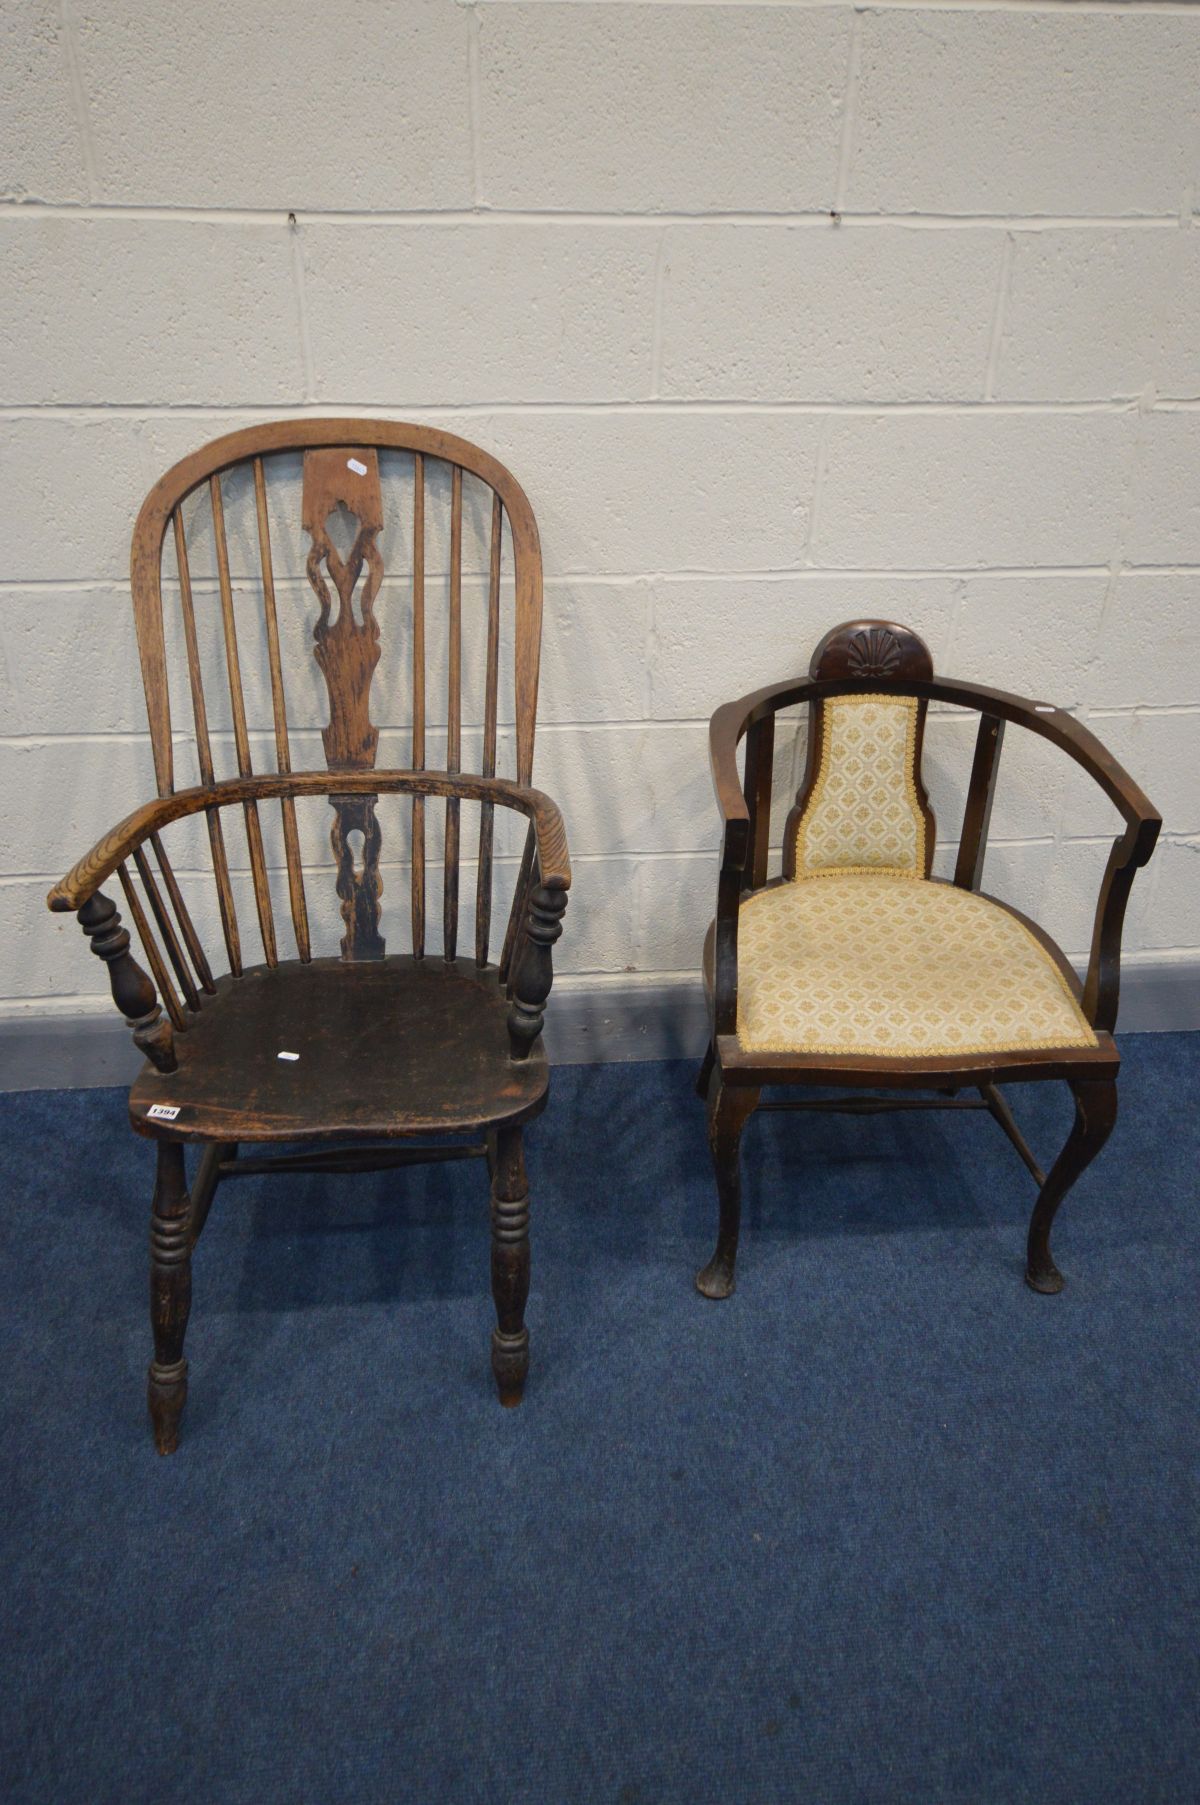 A 19TH CENTURY ELM AND BEECH WINDSOR ARMCHAIR (condition - over stained, solid frame) along with